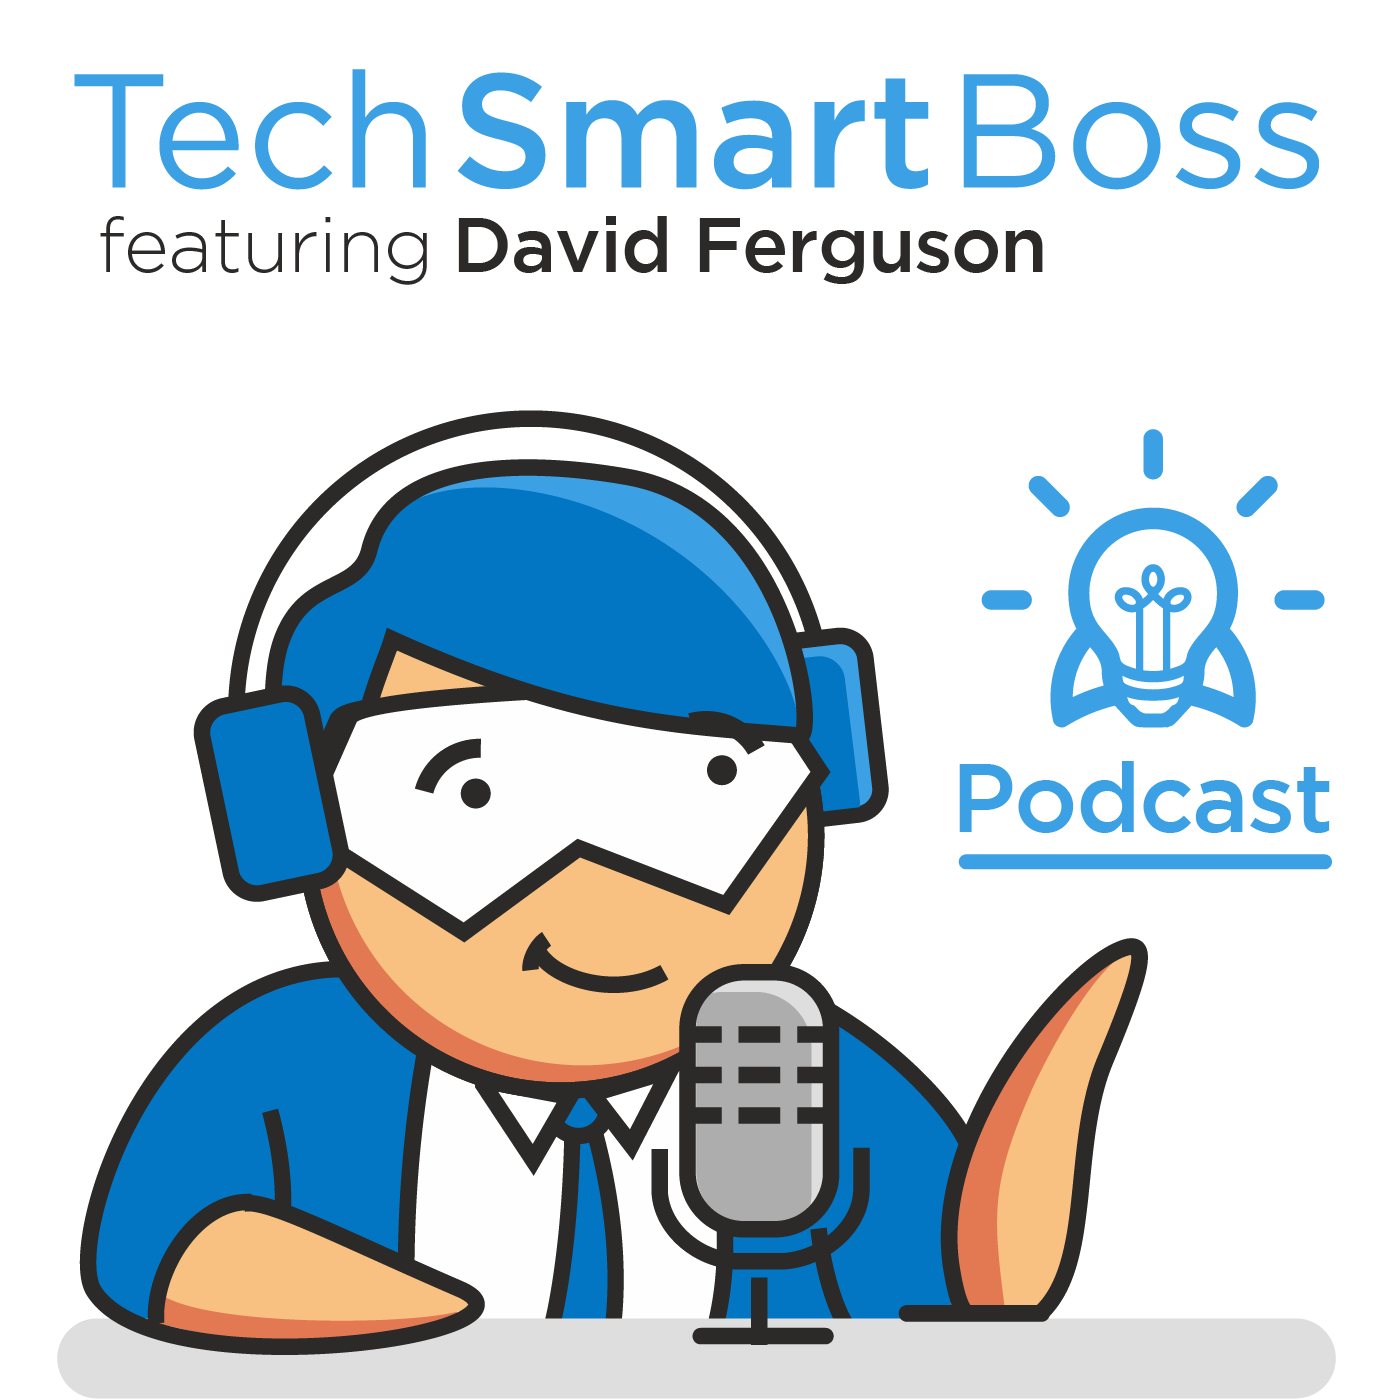 Episode 106: 5 Steps To Set Up Your Email Marketing Automation Platform (The Tech Smart Boss Way)